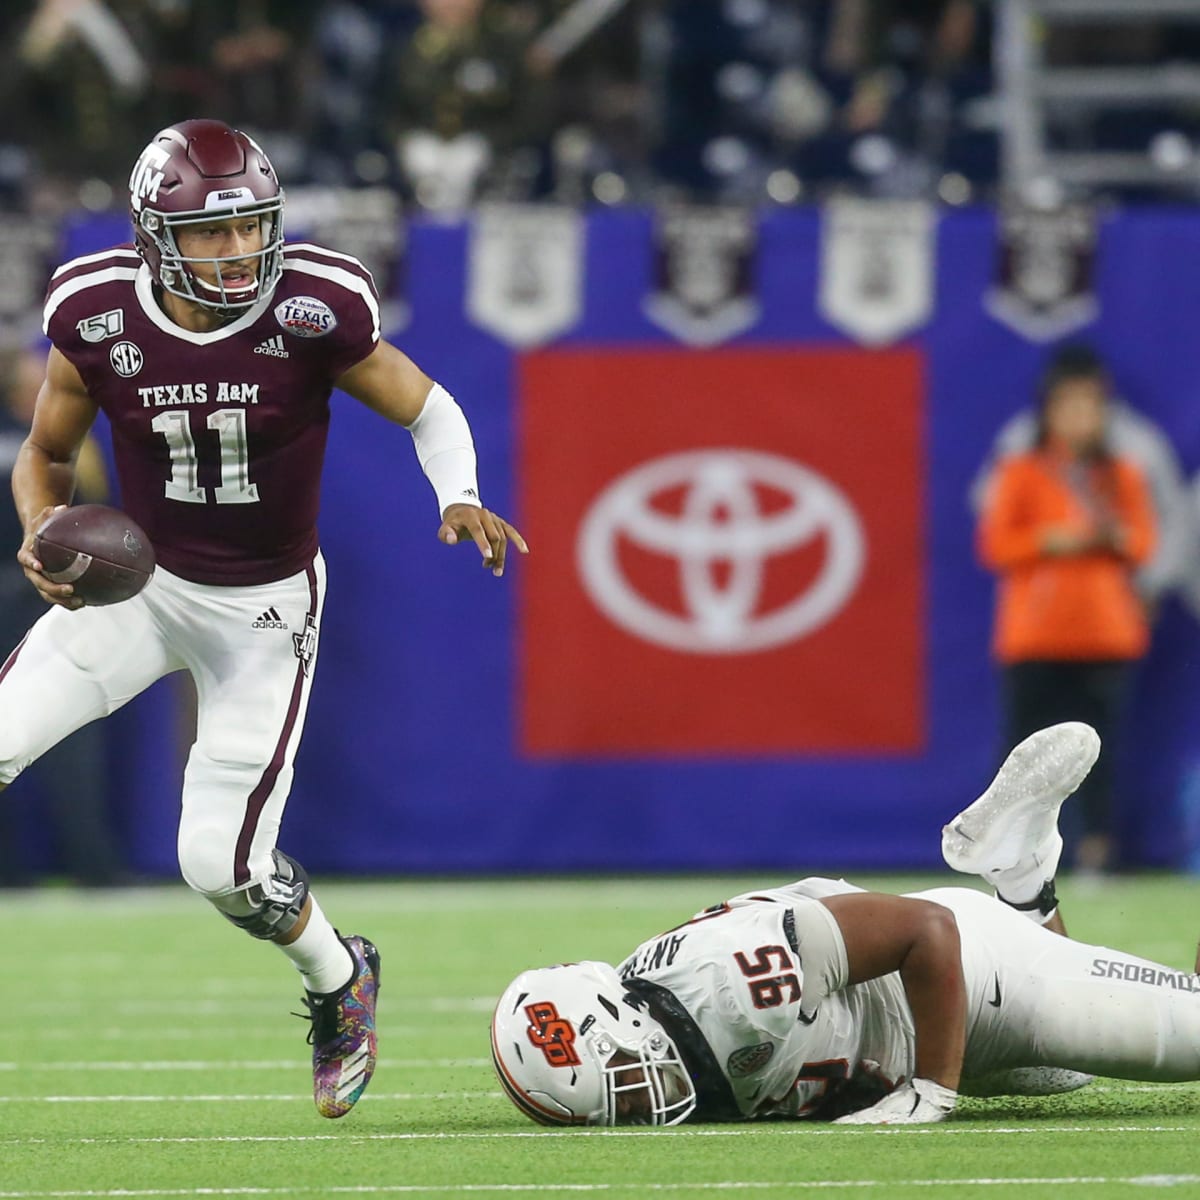 Tackling NFL Coverage With Aggie Core Values – The College of Arts &  Sciences at Texas A&M University